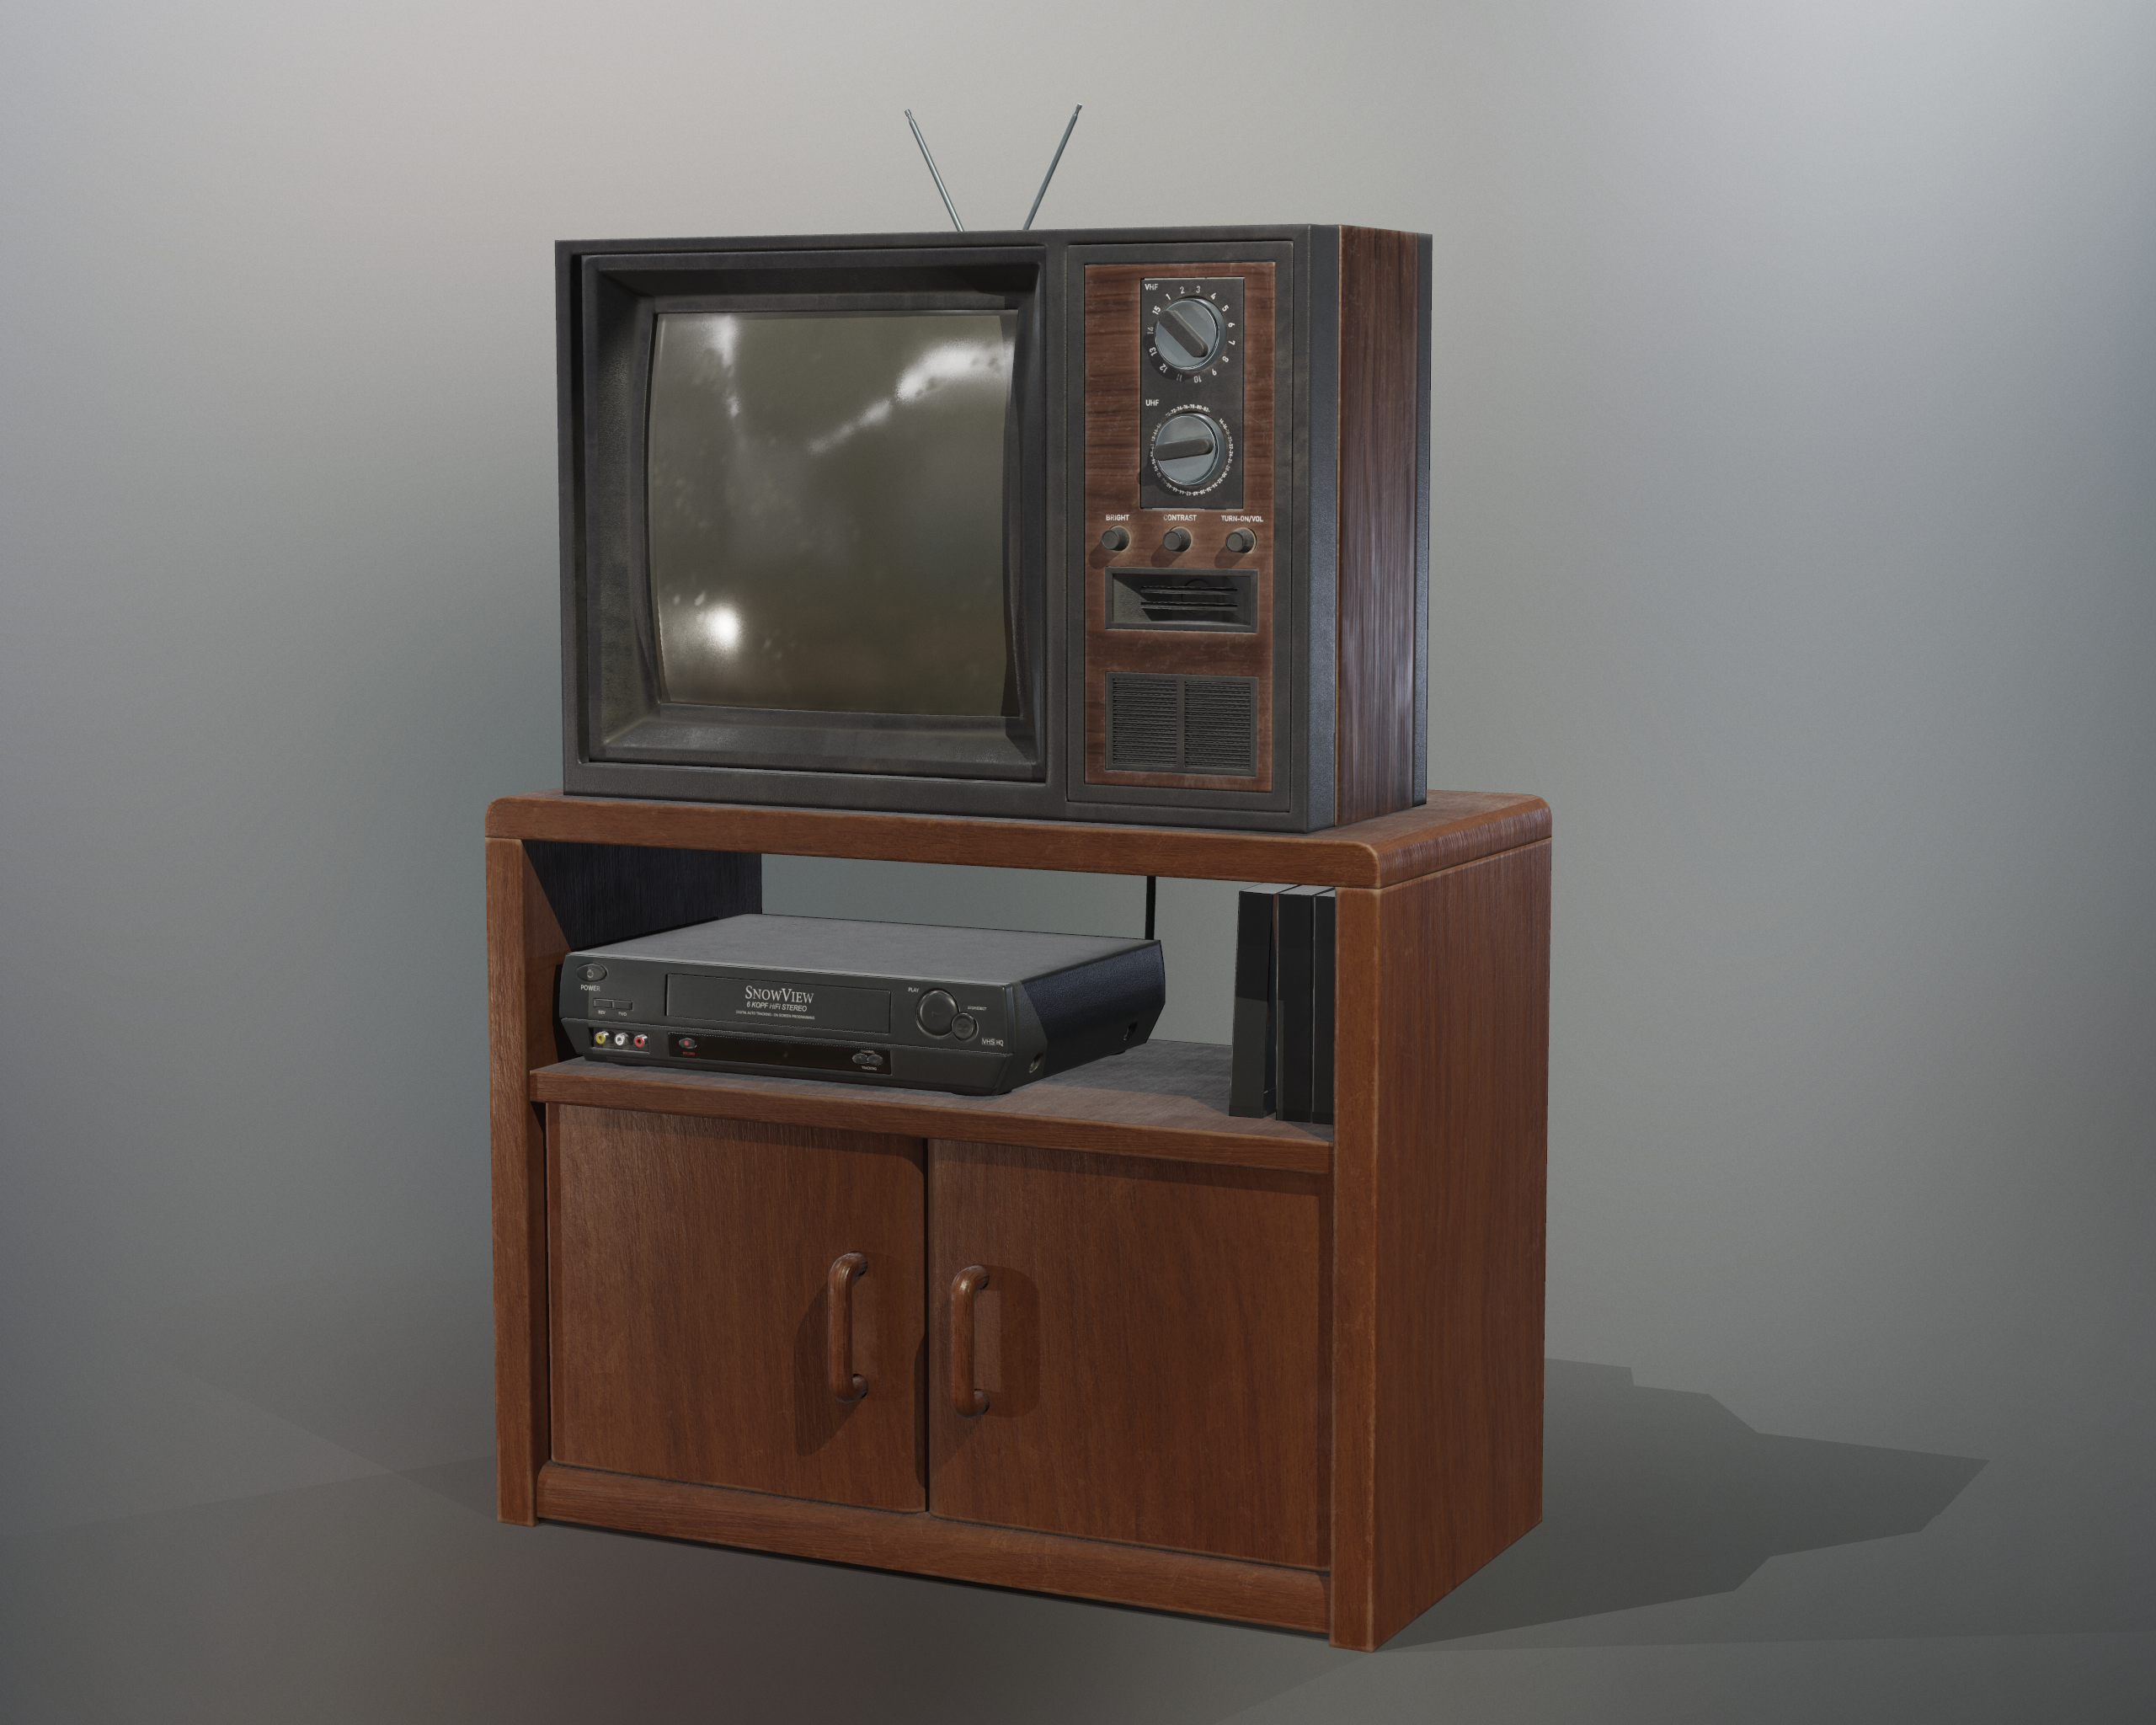 Old Tv preview image 1